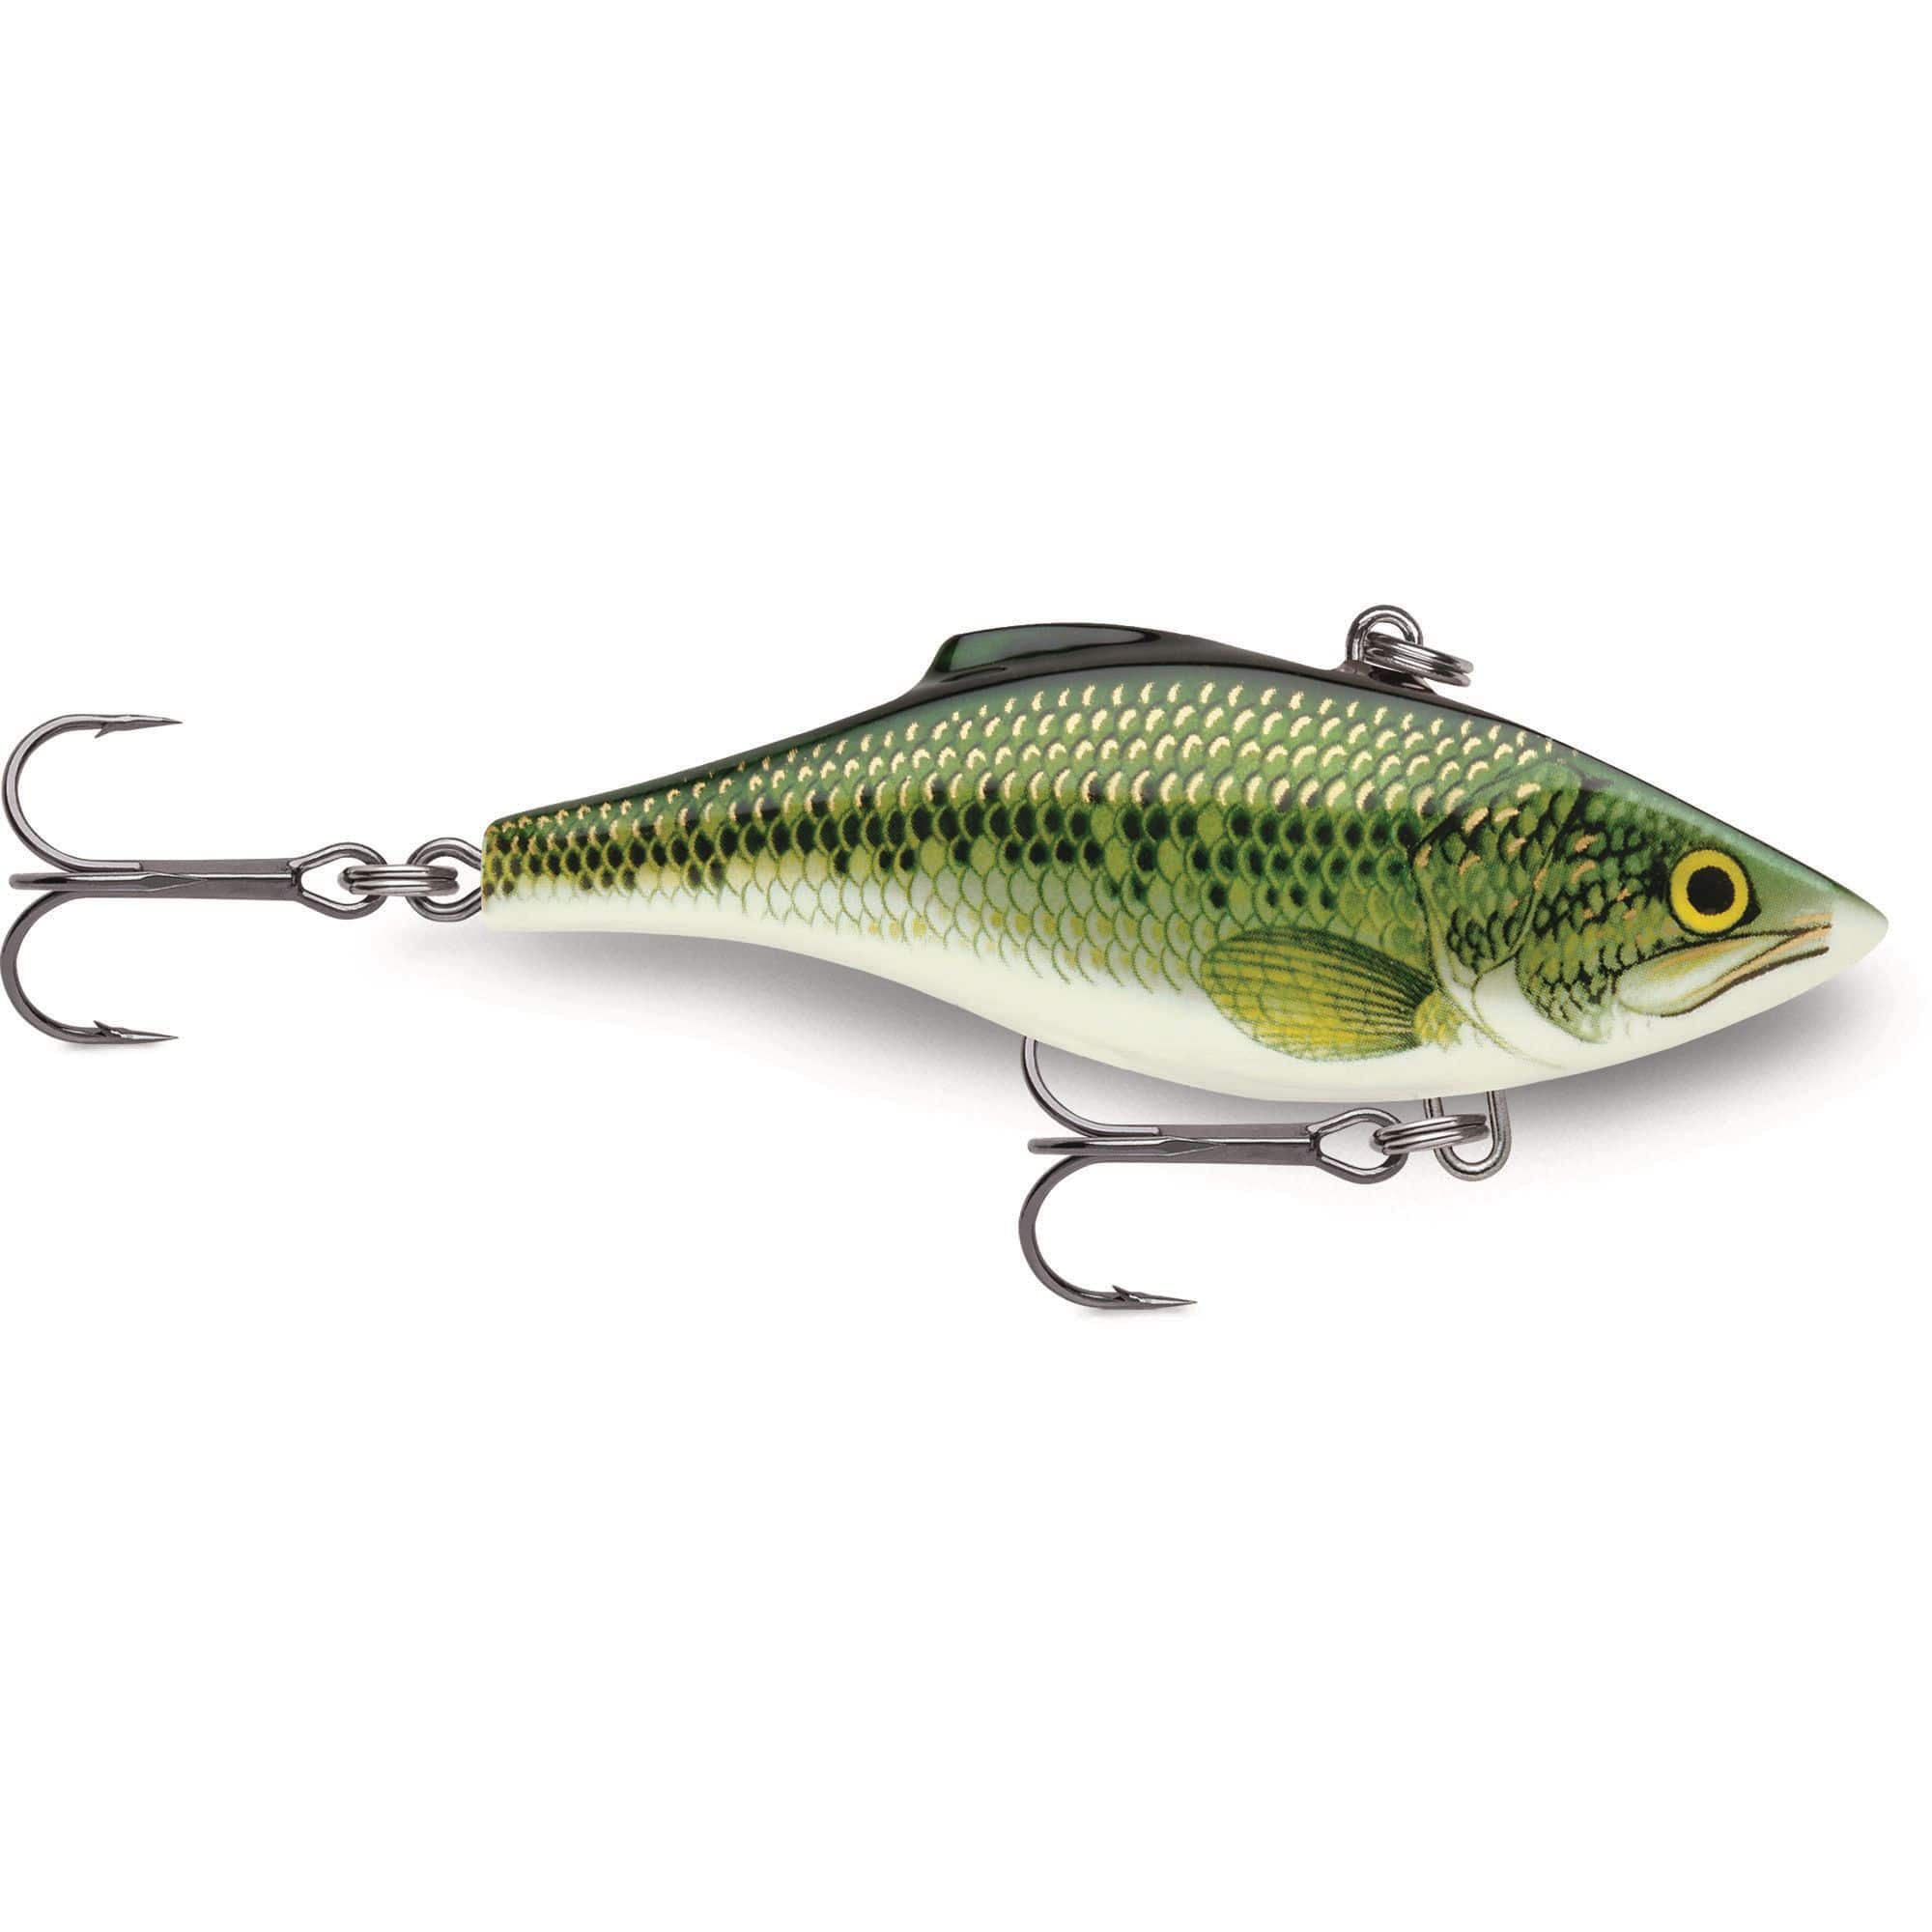 https://media-www.canadiantire.ca/product/playing/fishing/fishing-lures/0780940/rapala-rattlin-rap-baby-bass-07-aa454dad-6840-4a84-bfe8-ced81d079c95-jpgrendition.jpg